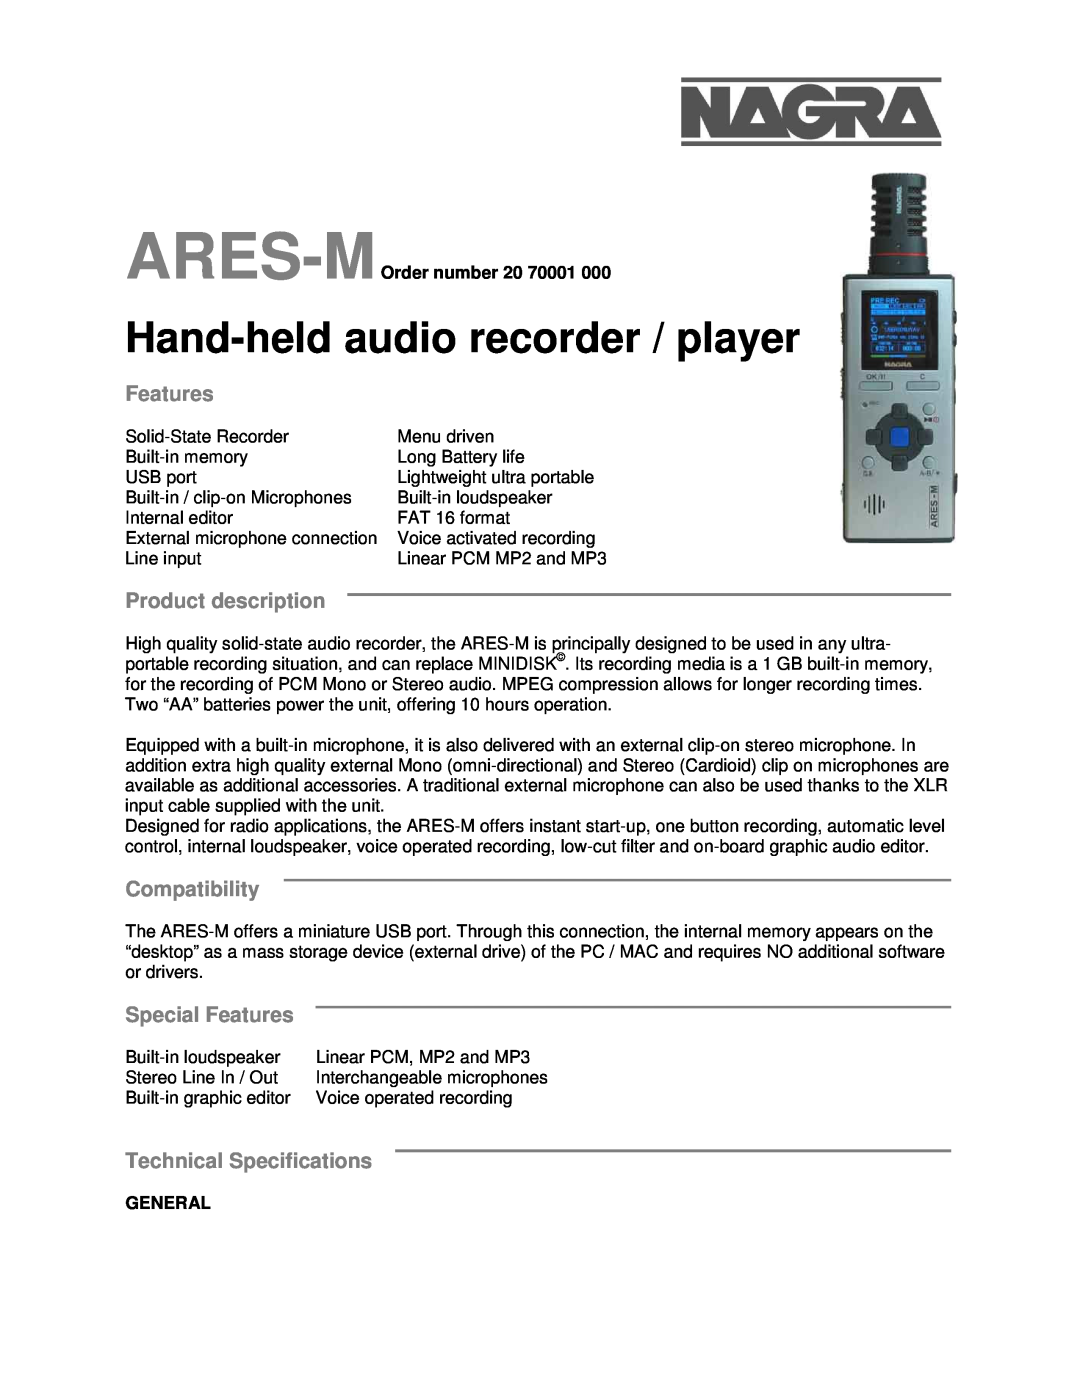 Nagra Ares-M technical specifications Hand-held audio recorder / player, Features, Product description, Compatibility 